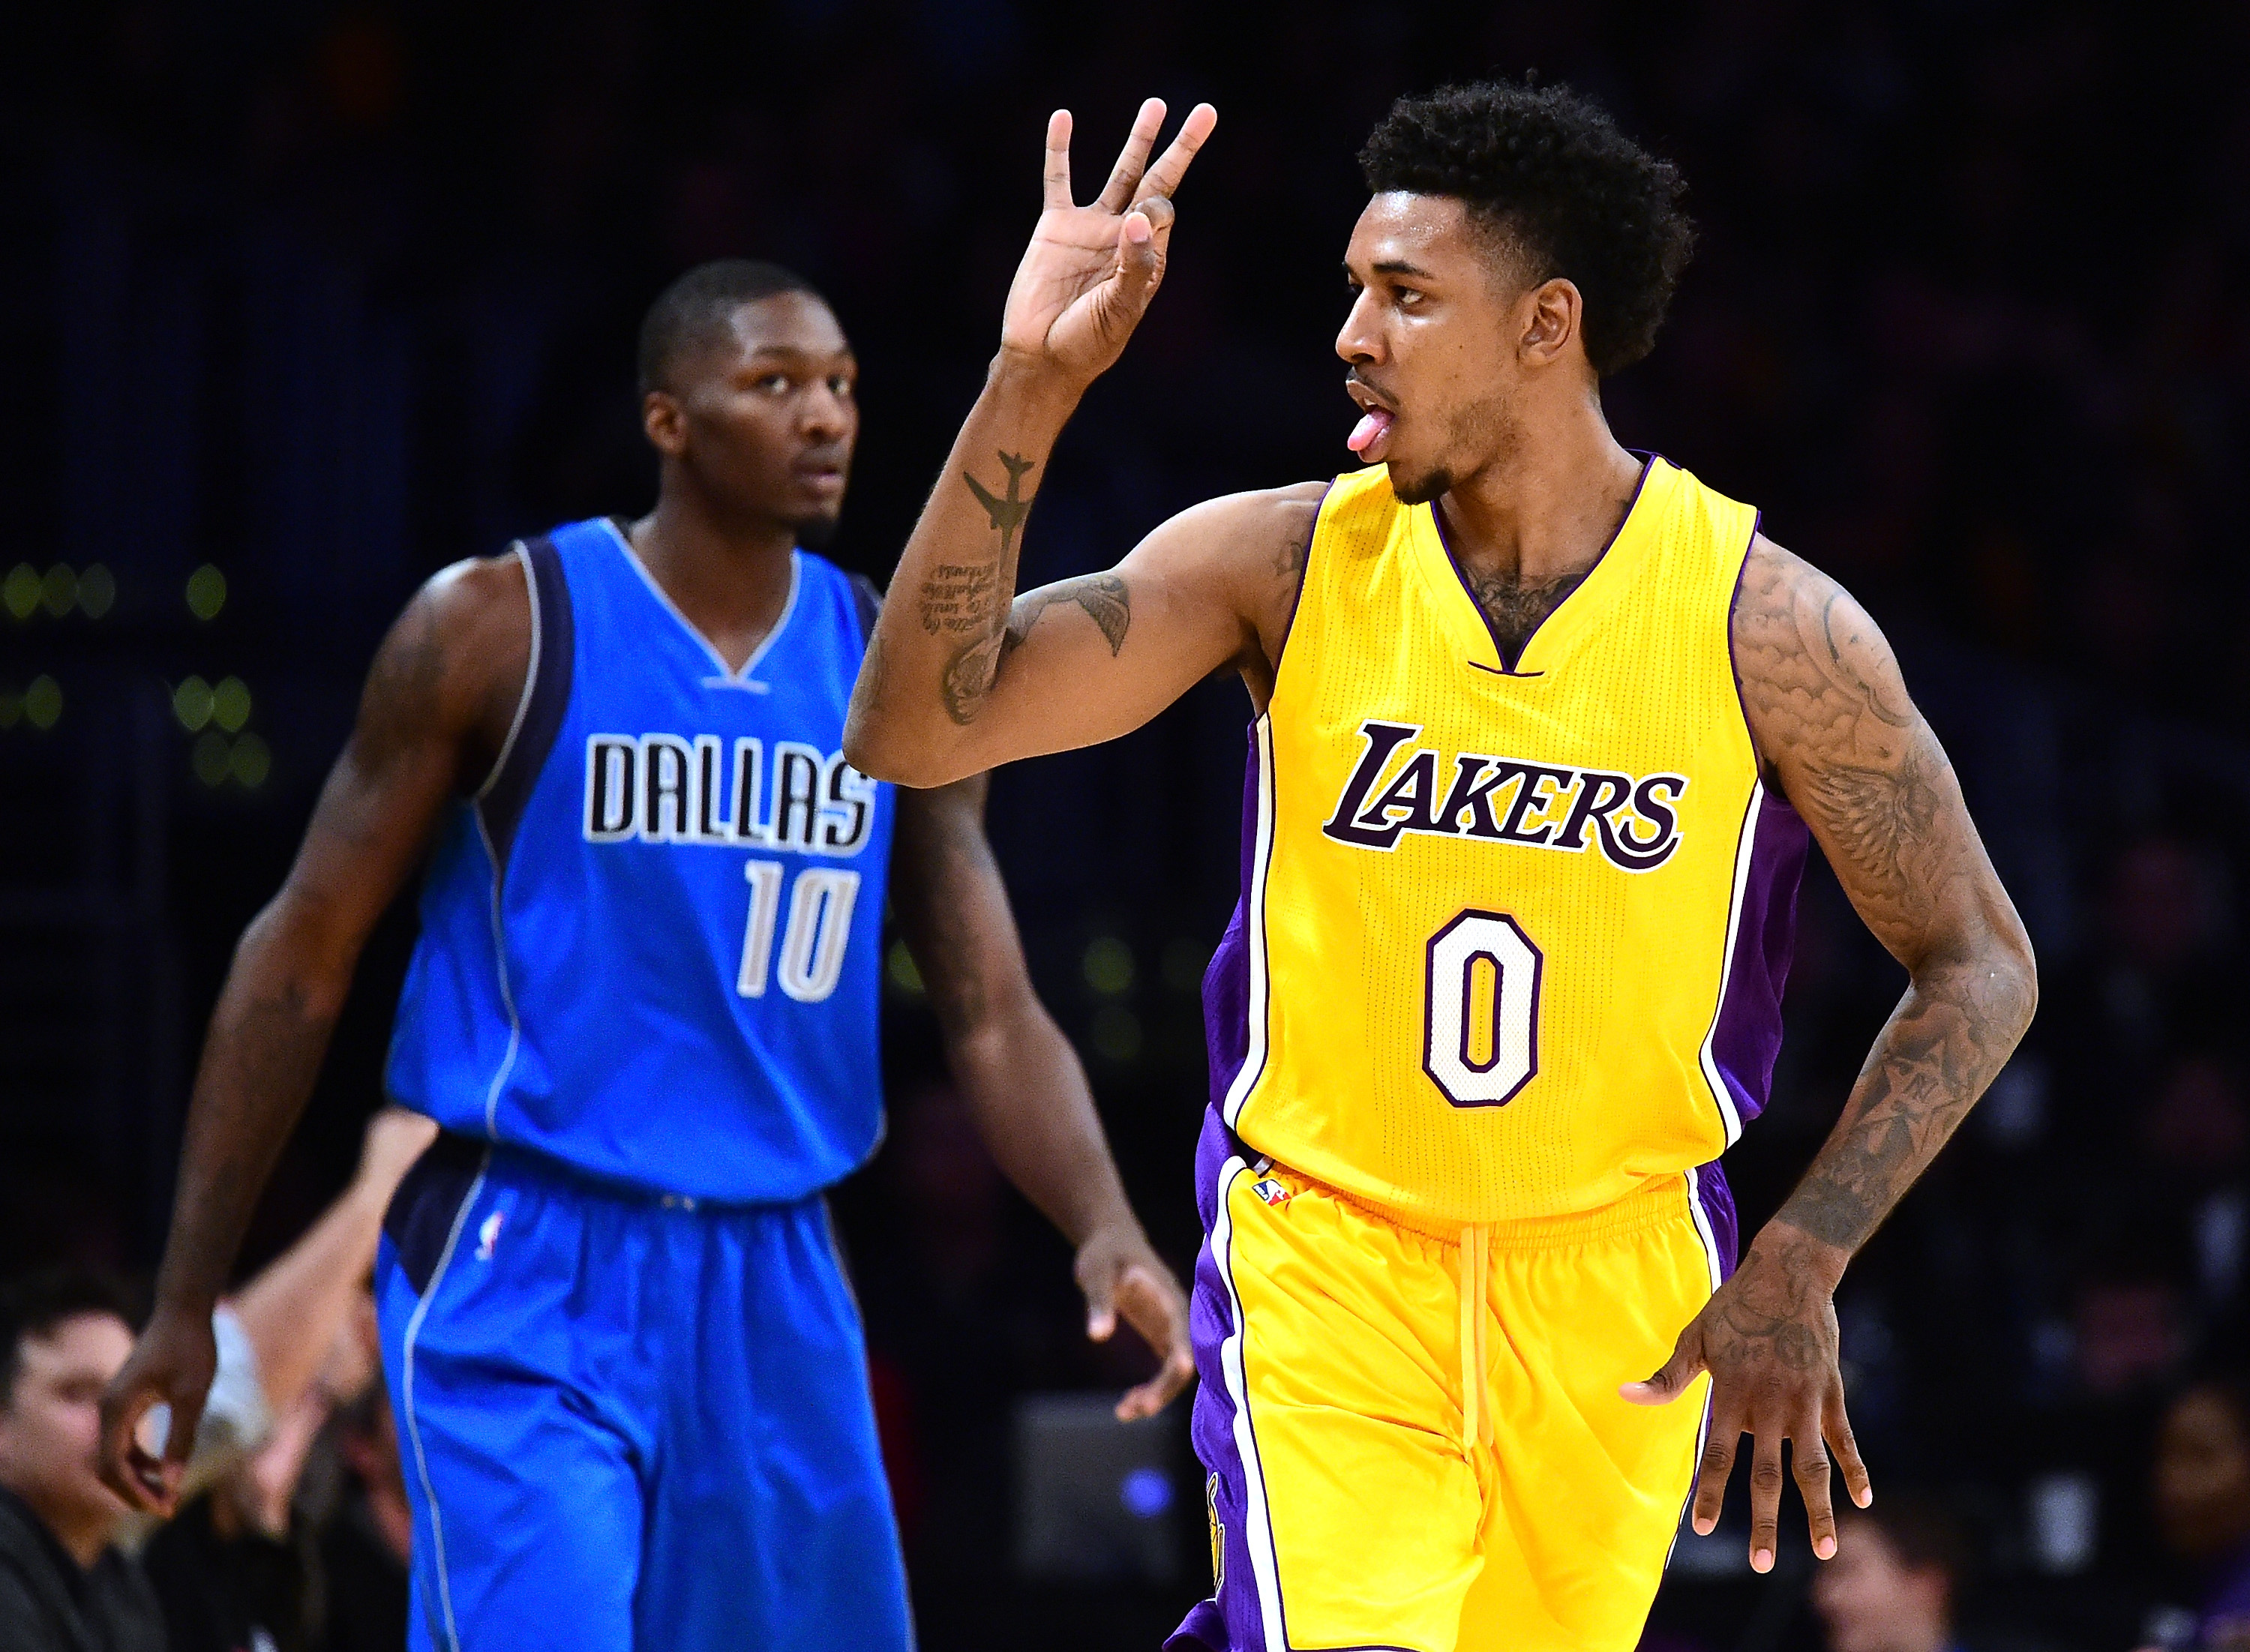 Nick Young on playing against Lakers: “I'm going to go in and try